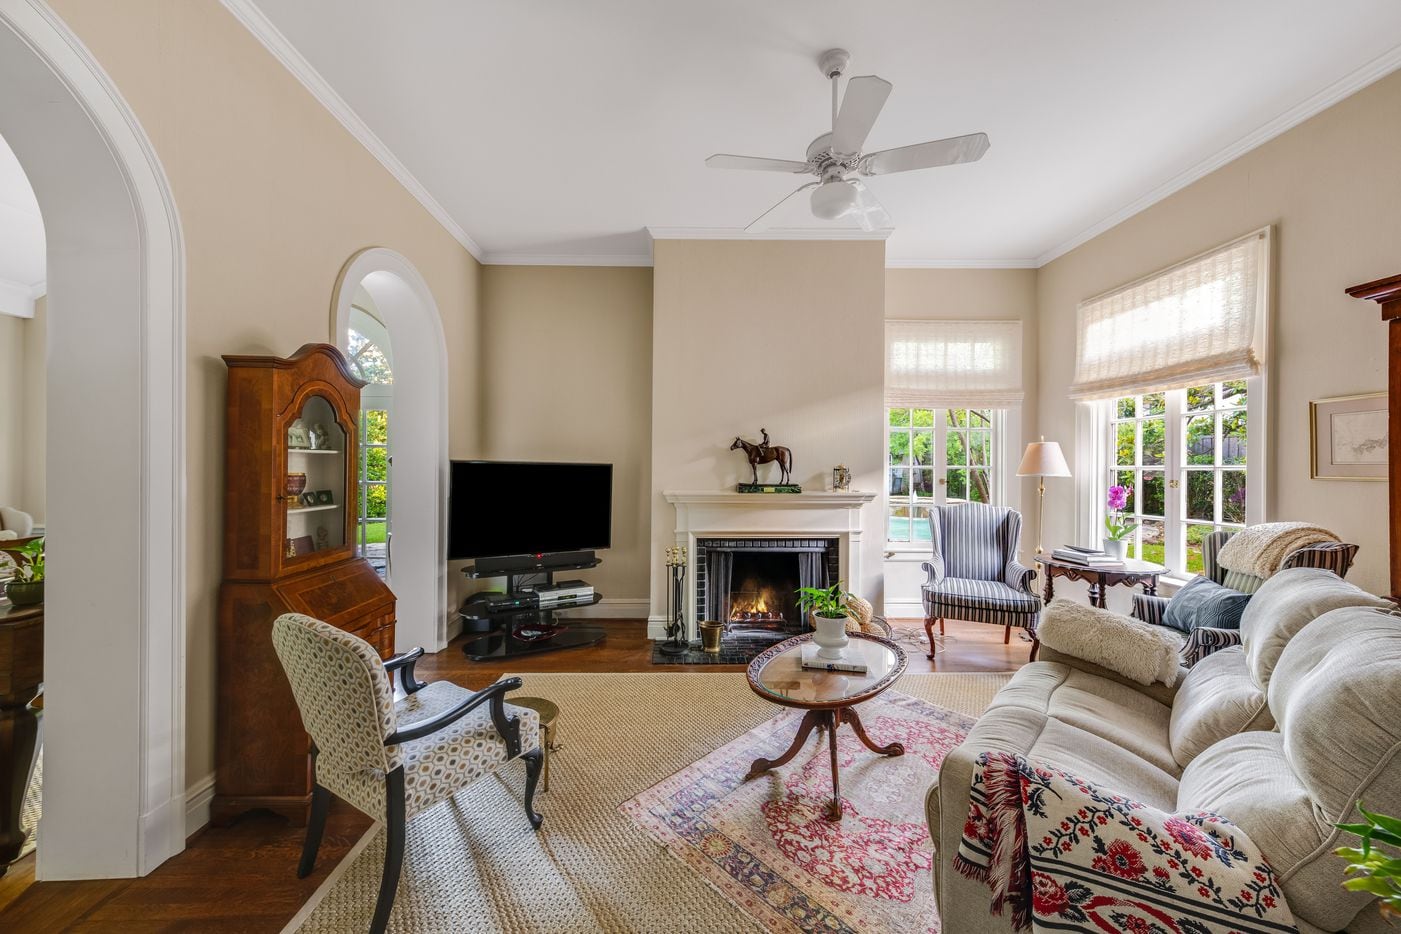 Take a look at the 4001 Lovers Lane Circle home in University Park.